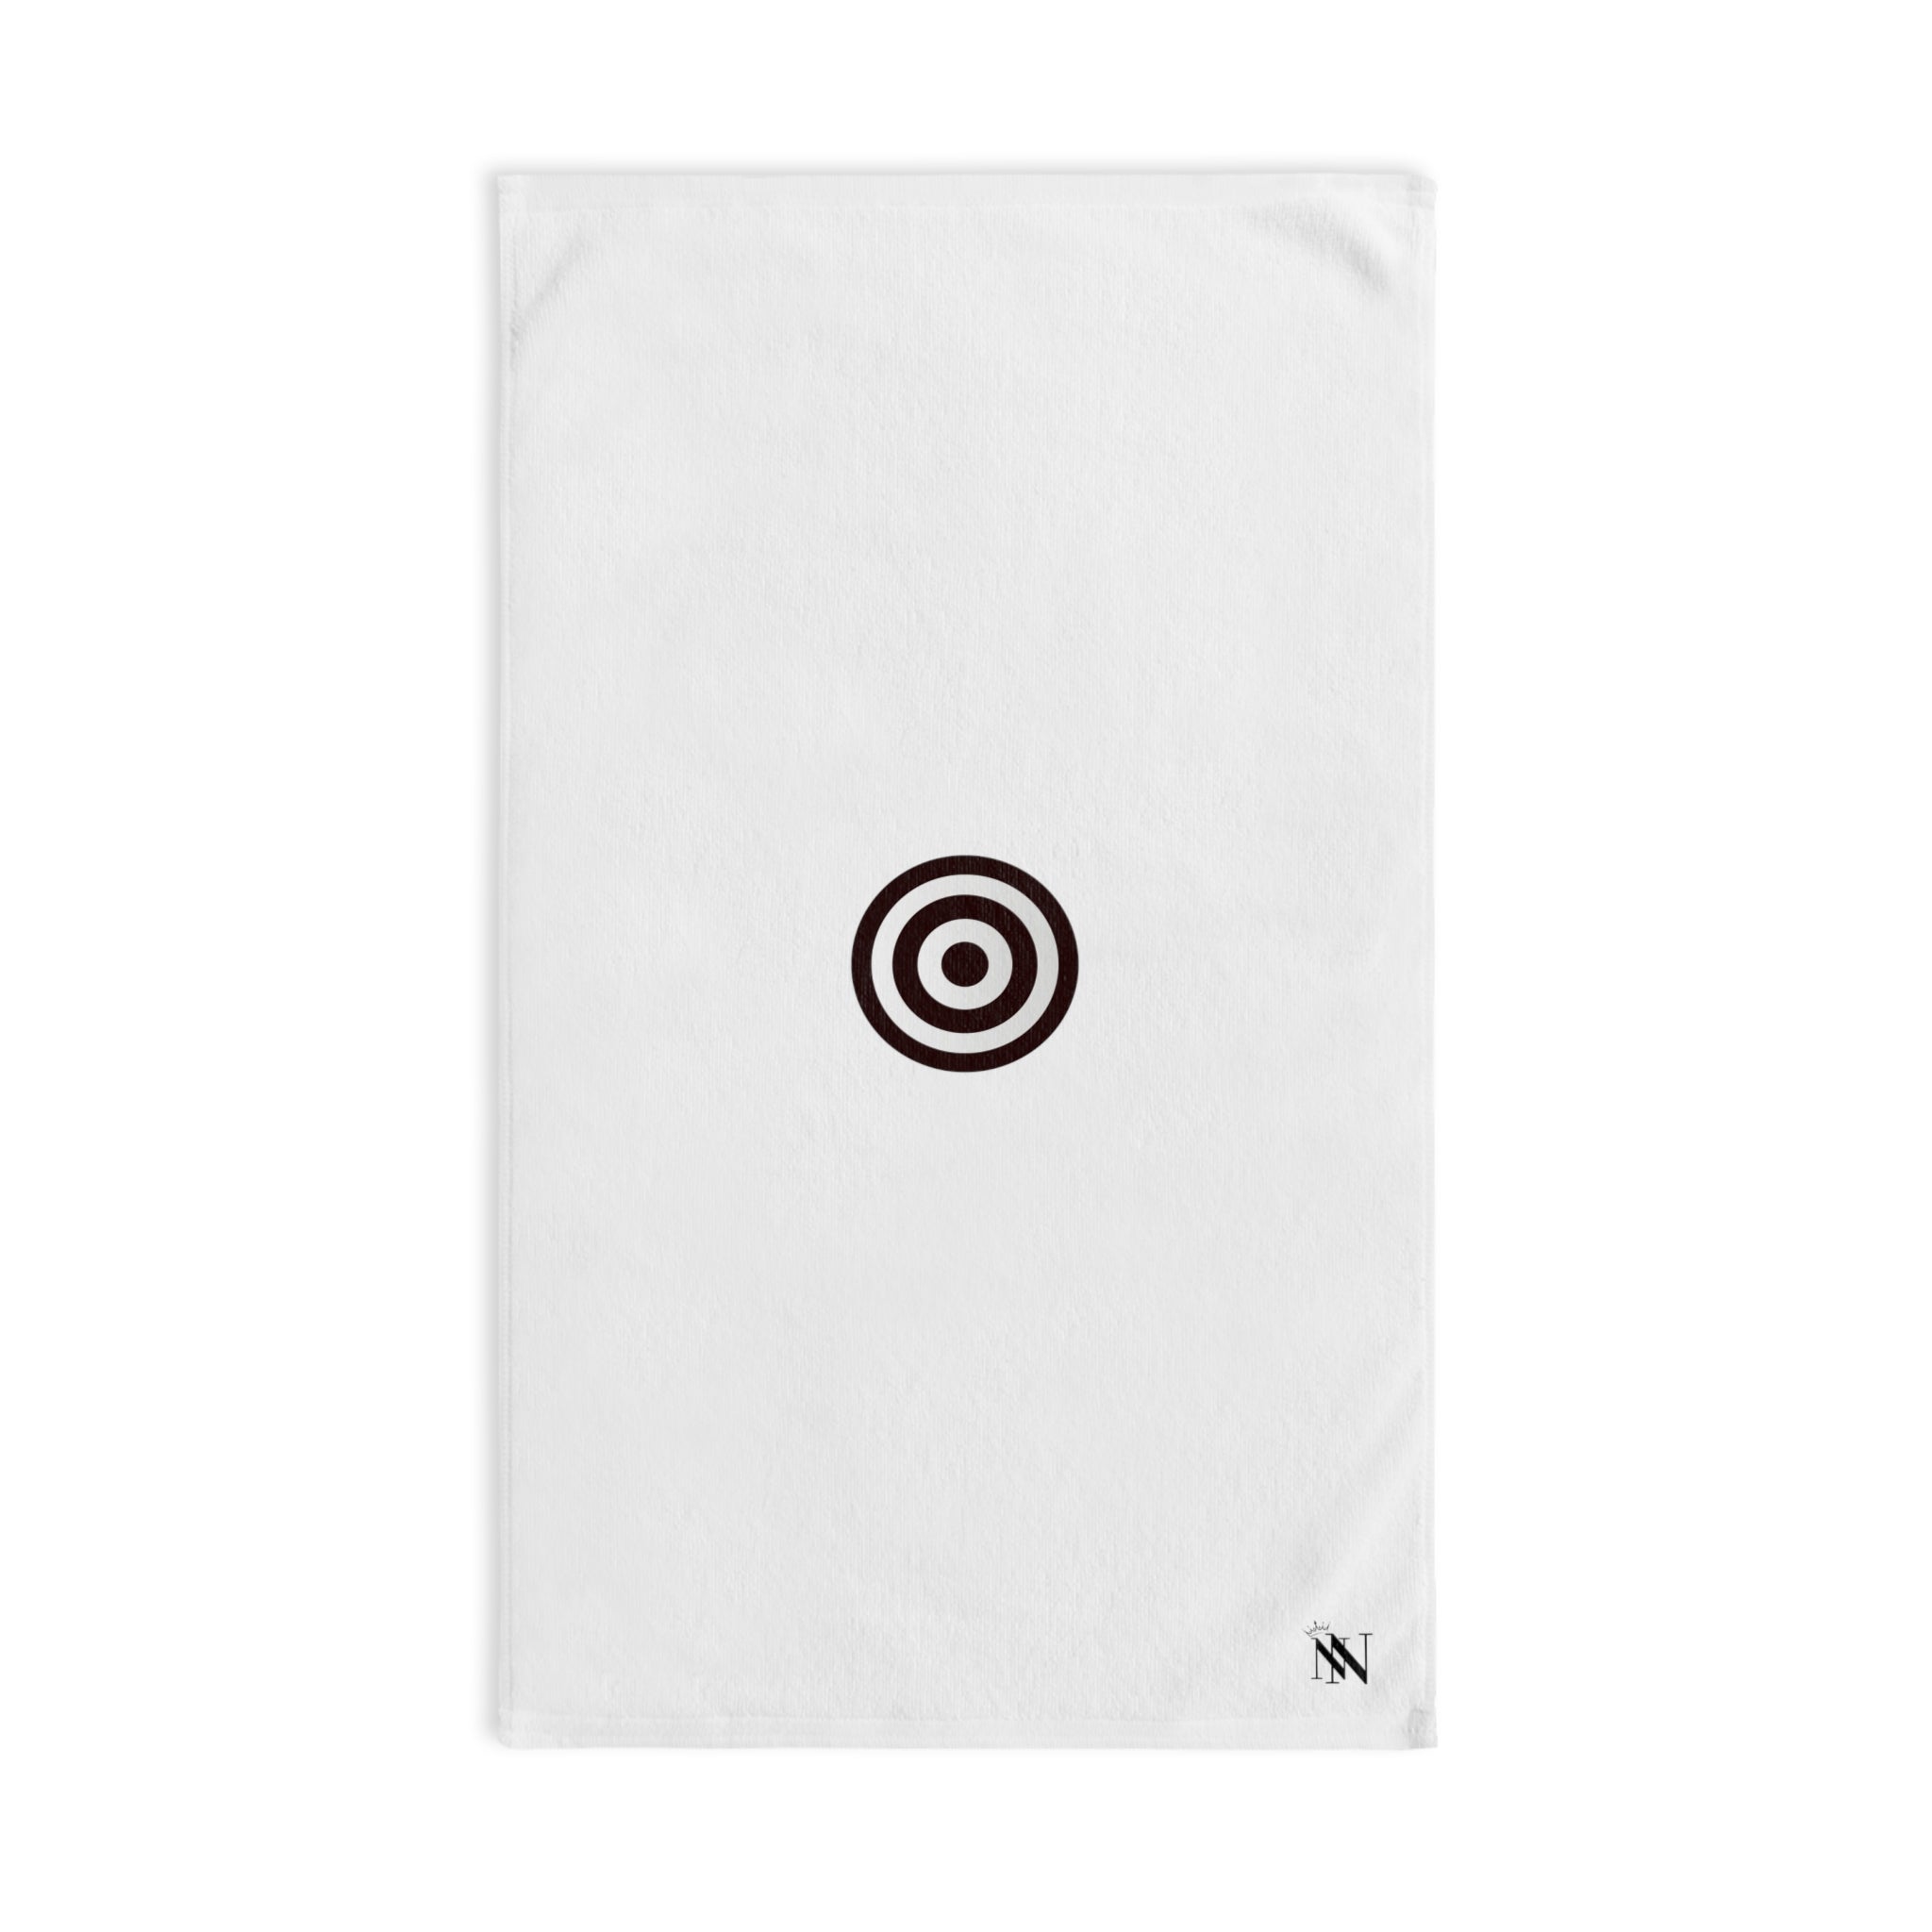 Small Black Bullseye White | Funny Gifts for Men - Gifts for Him - Birthday Gifts for Men, Him, Her, Husband, Boyfriend, Girlfriend, New Couple Gifts, Fathers & Valentines Day Gifts, Christmas Gifts NECTAR NAPKINS